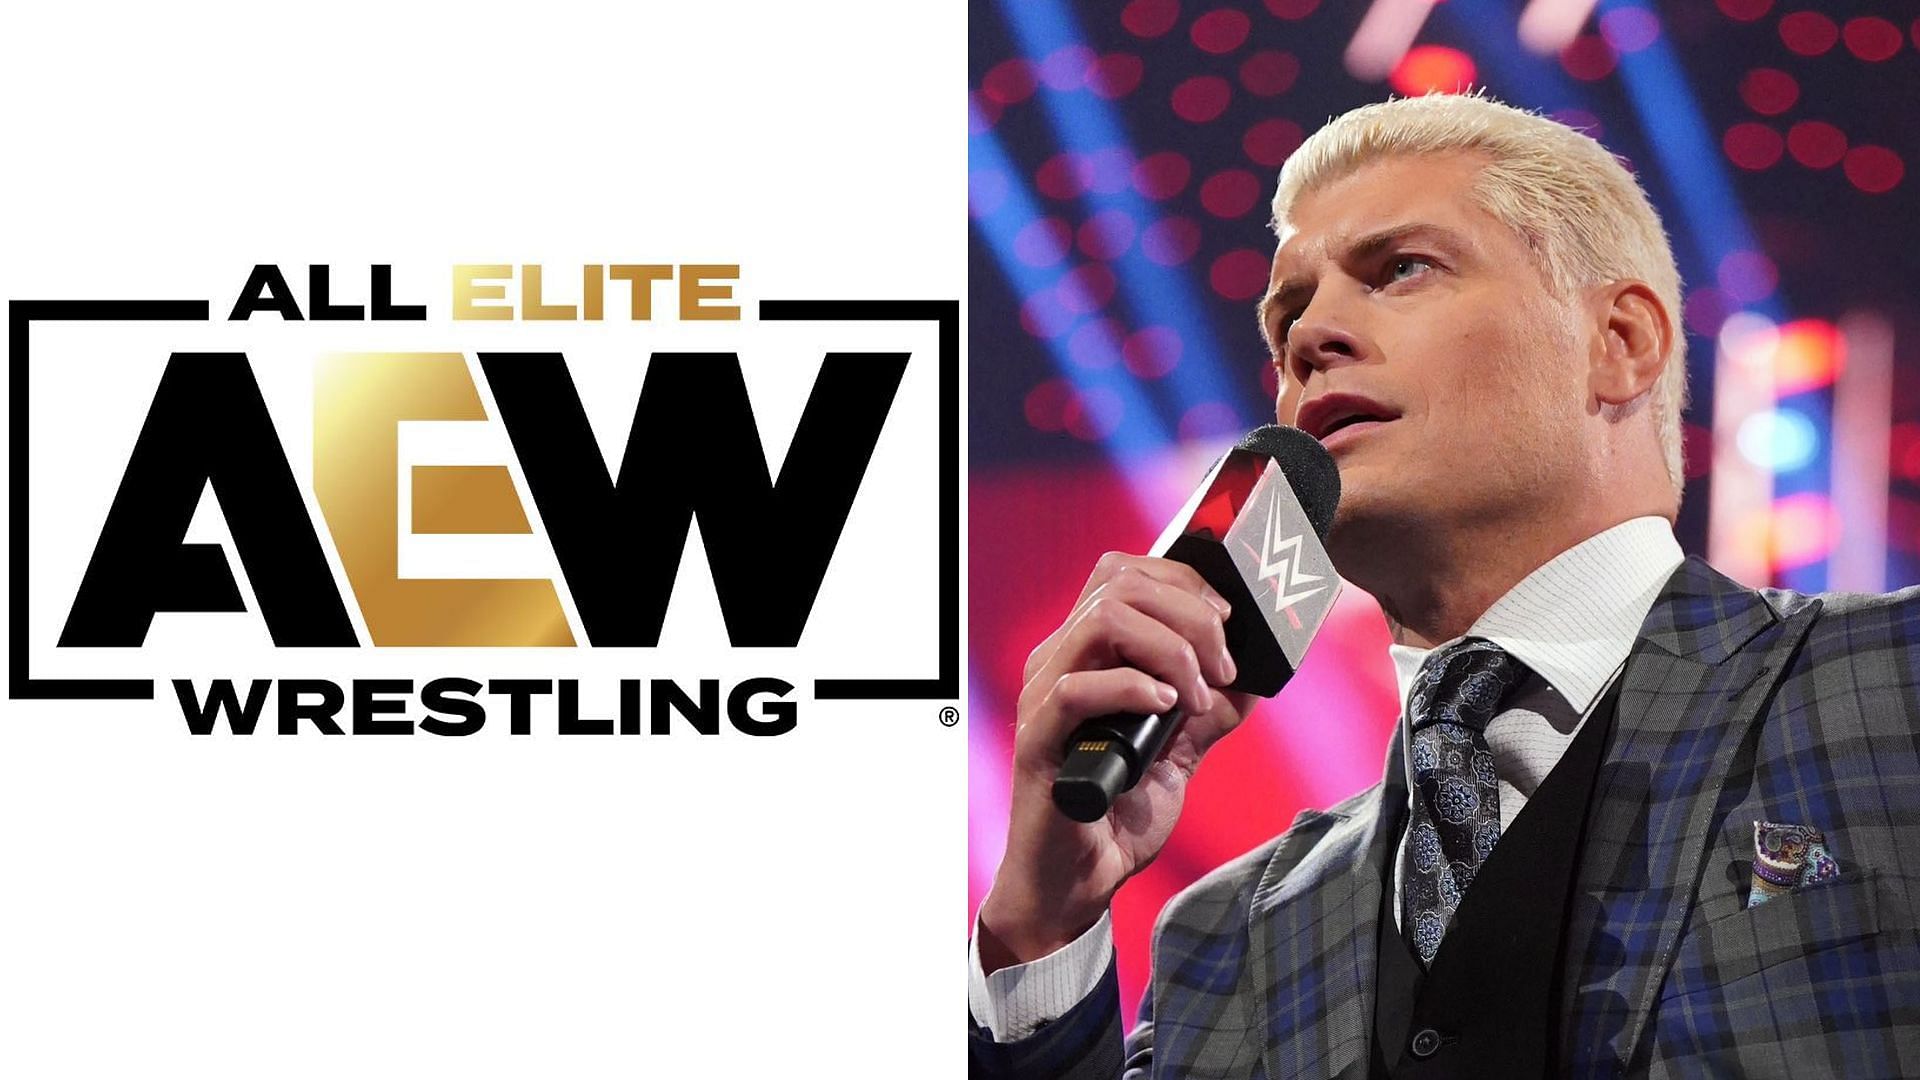 Cody Rhodes left AEW in 2022 to join WWE